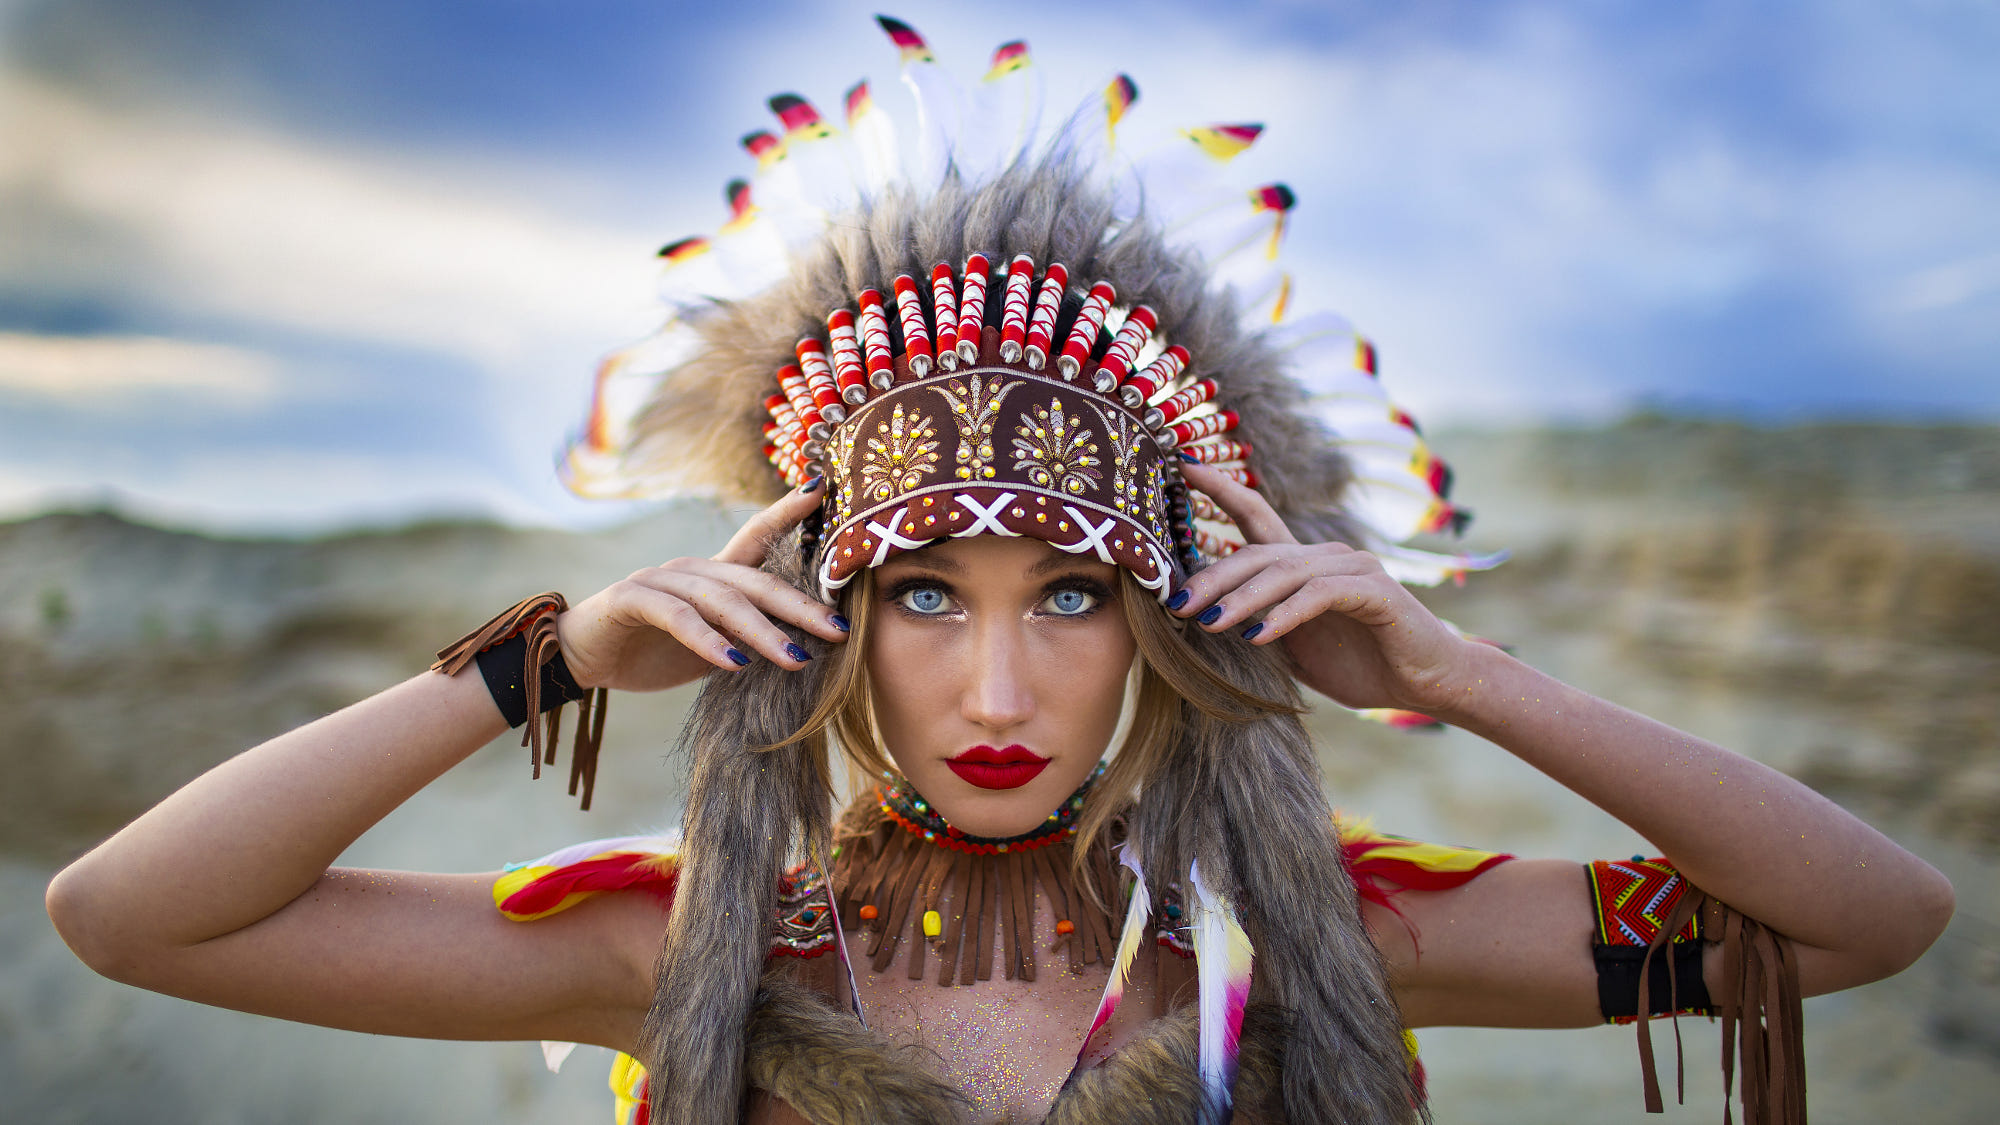 People 2000x1125 women feathers blue nails red lipstick blue eyes women outdoors portrait colorful sacrilege headdress Native American clothing